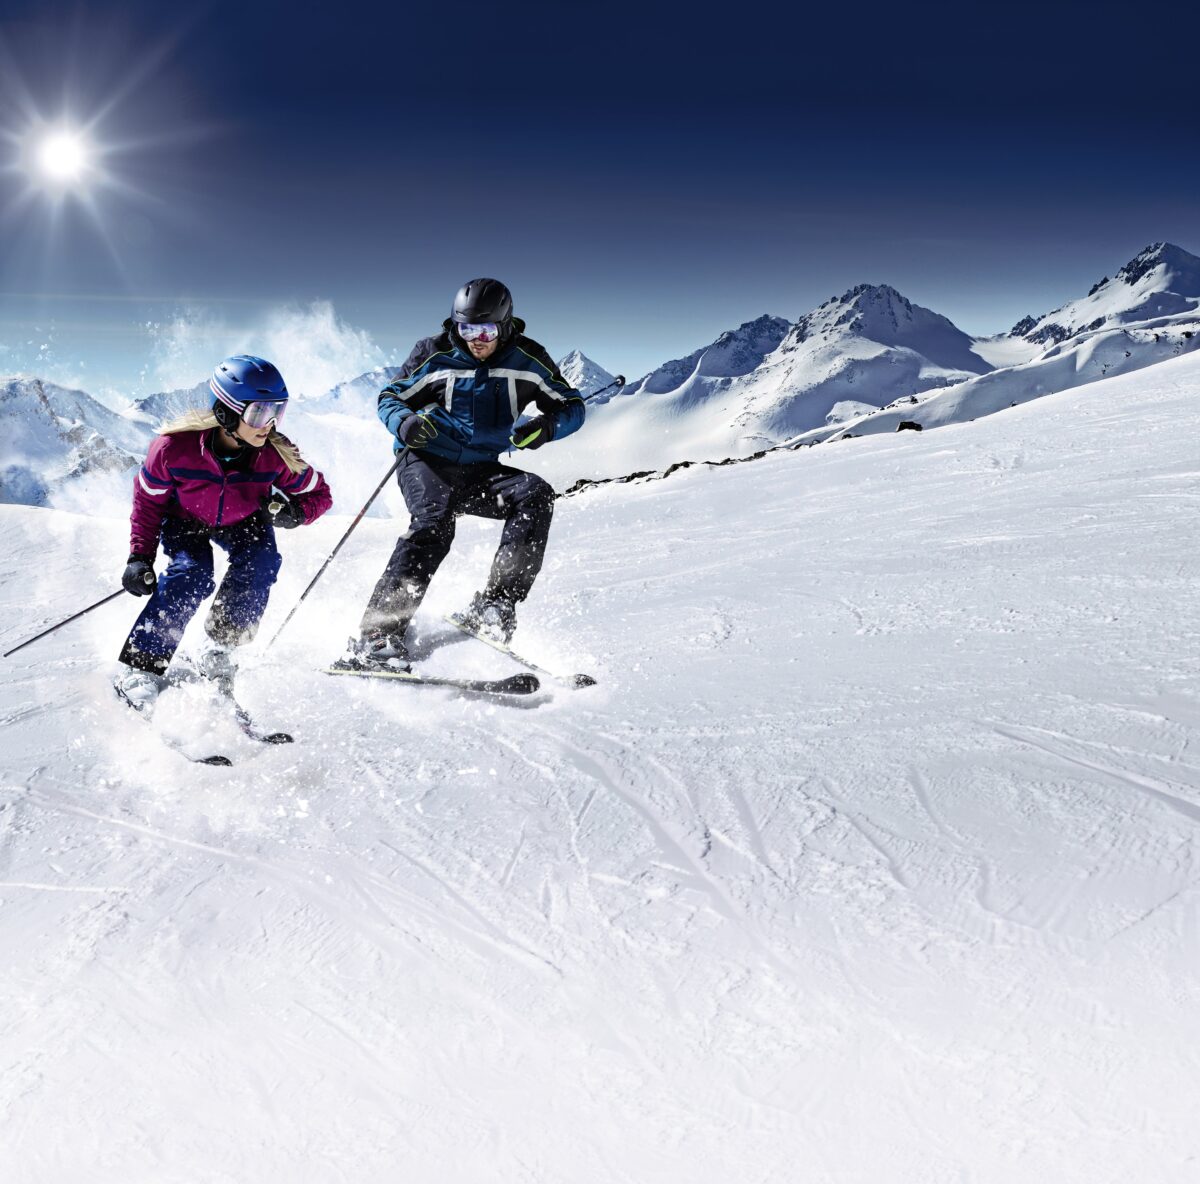 Tackle the slopes in style with ALDI’s ski wear essentials for the whole family